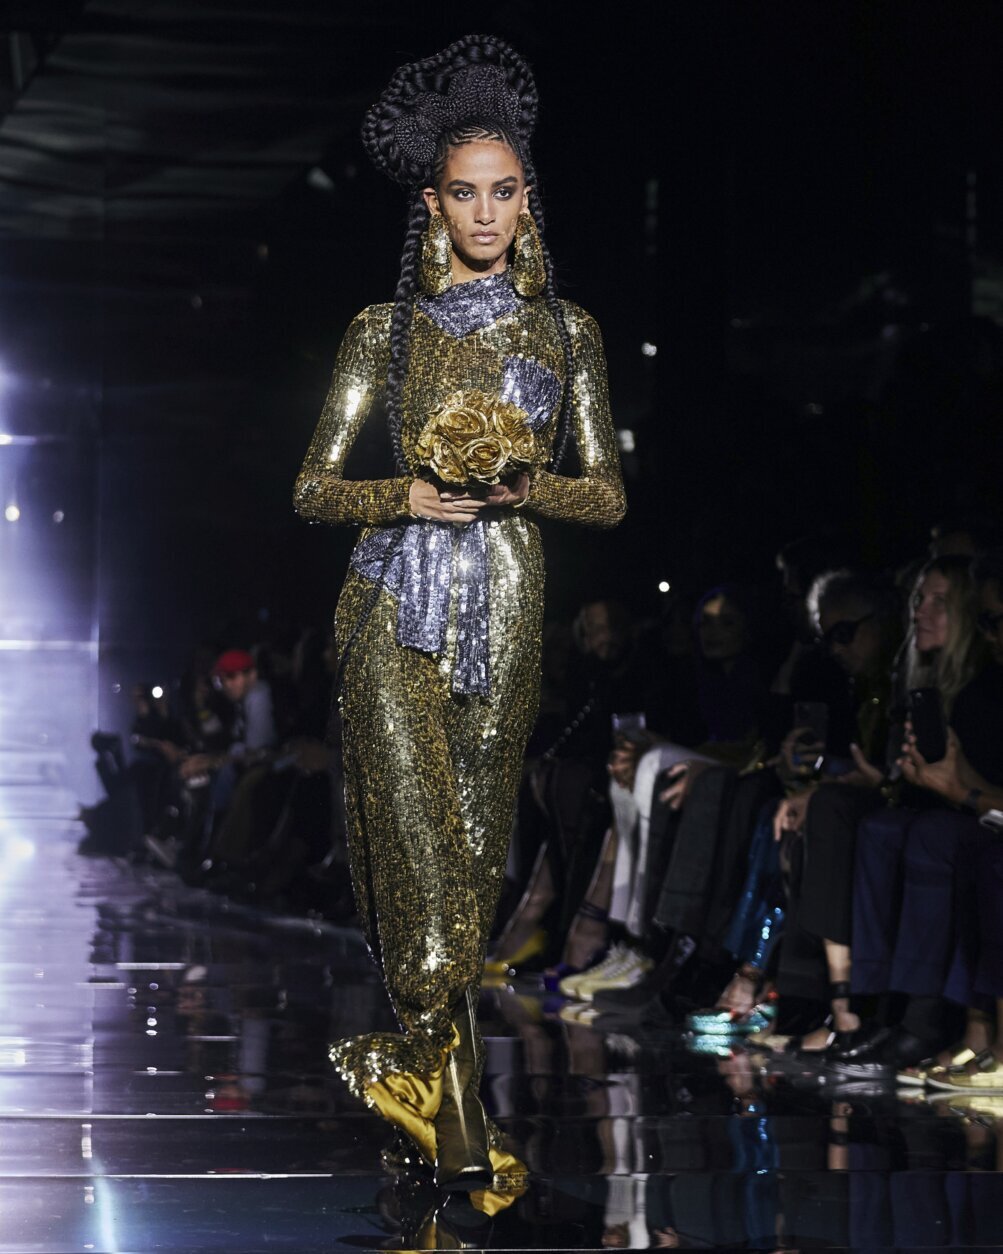 Tom Ford closes Fashion Week with big hair, miles of sparkle - WTOP News